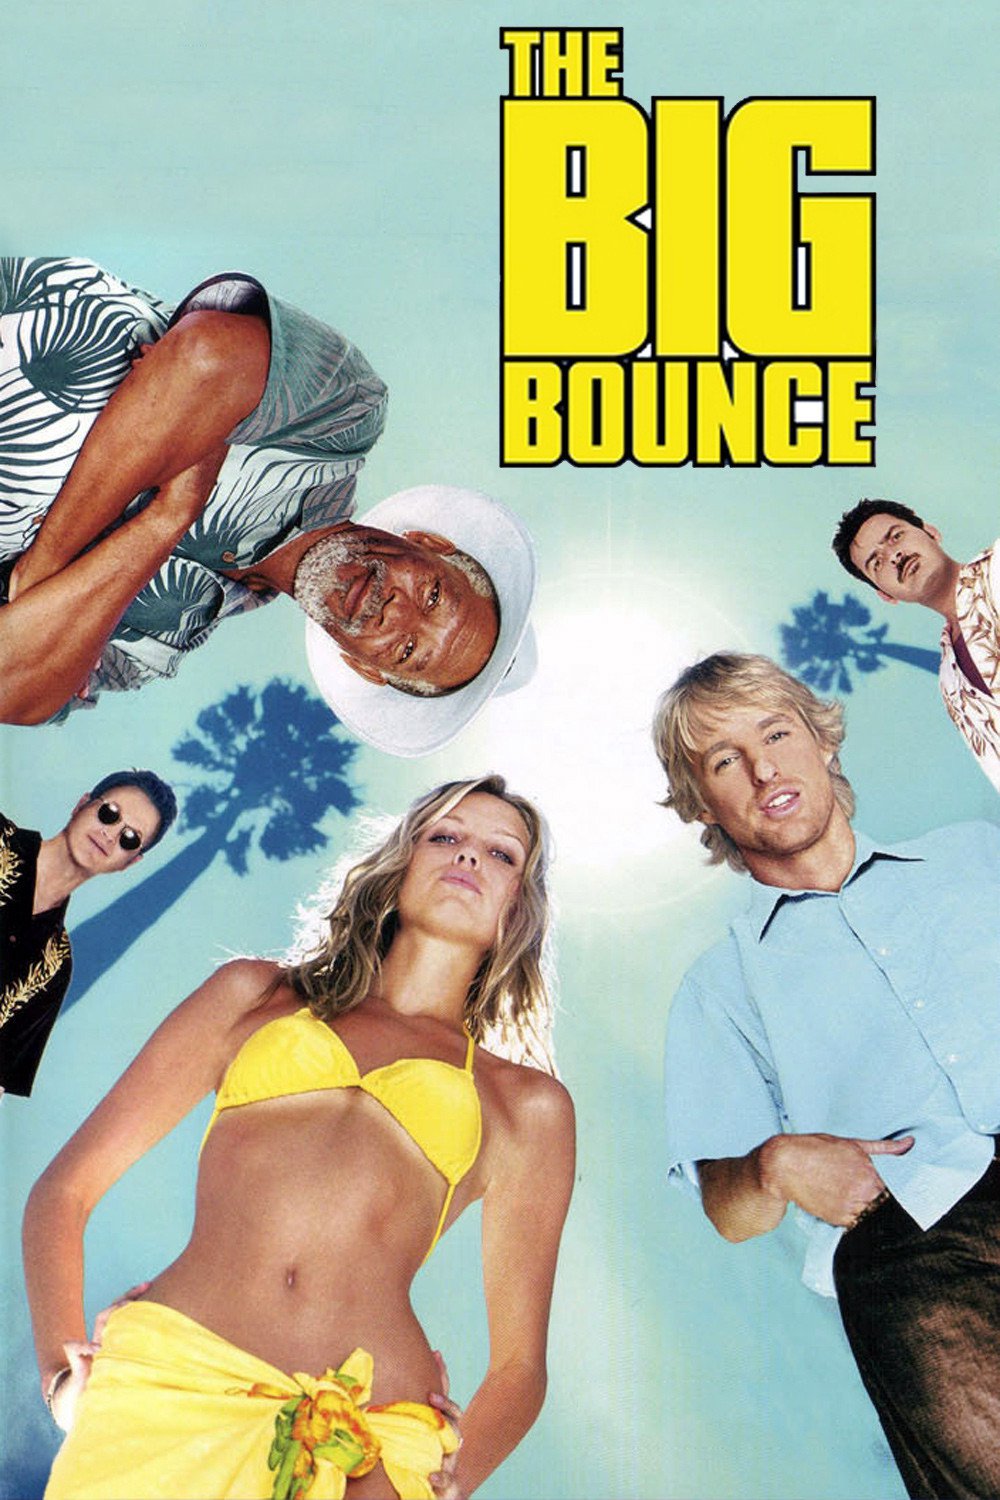 Poster for the movie "The Big Bounce"